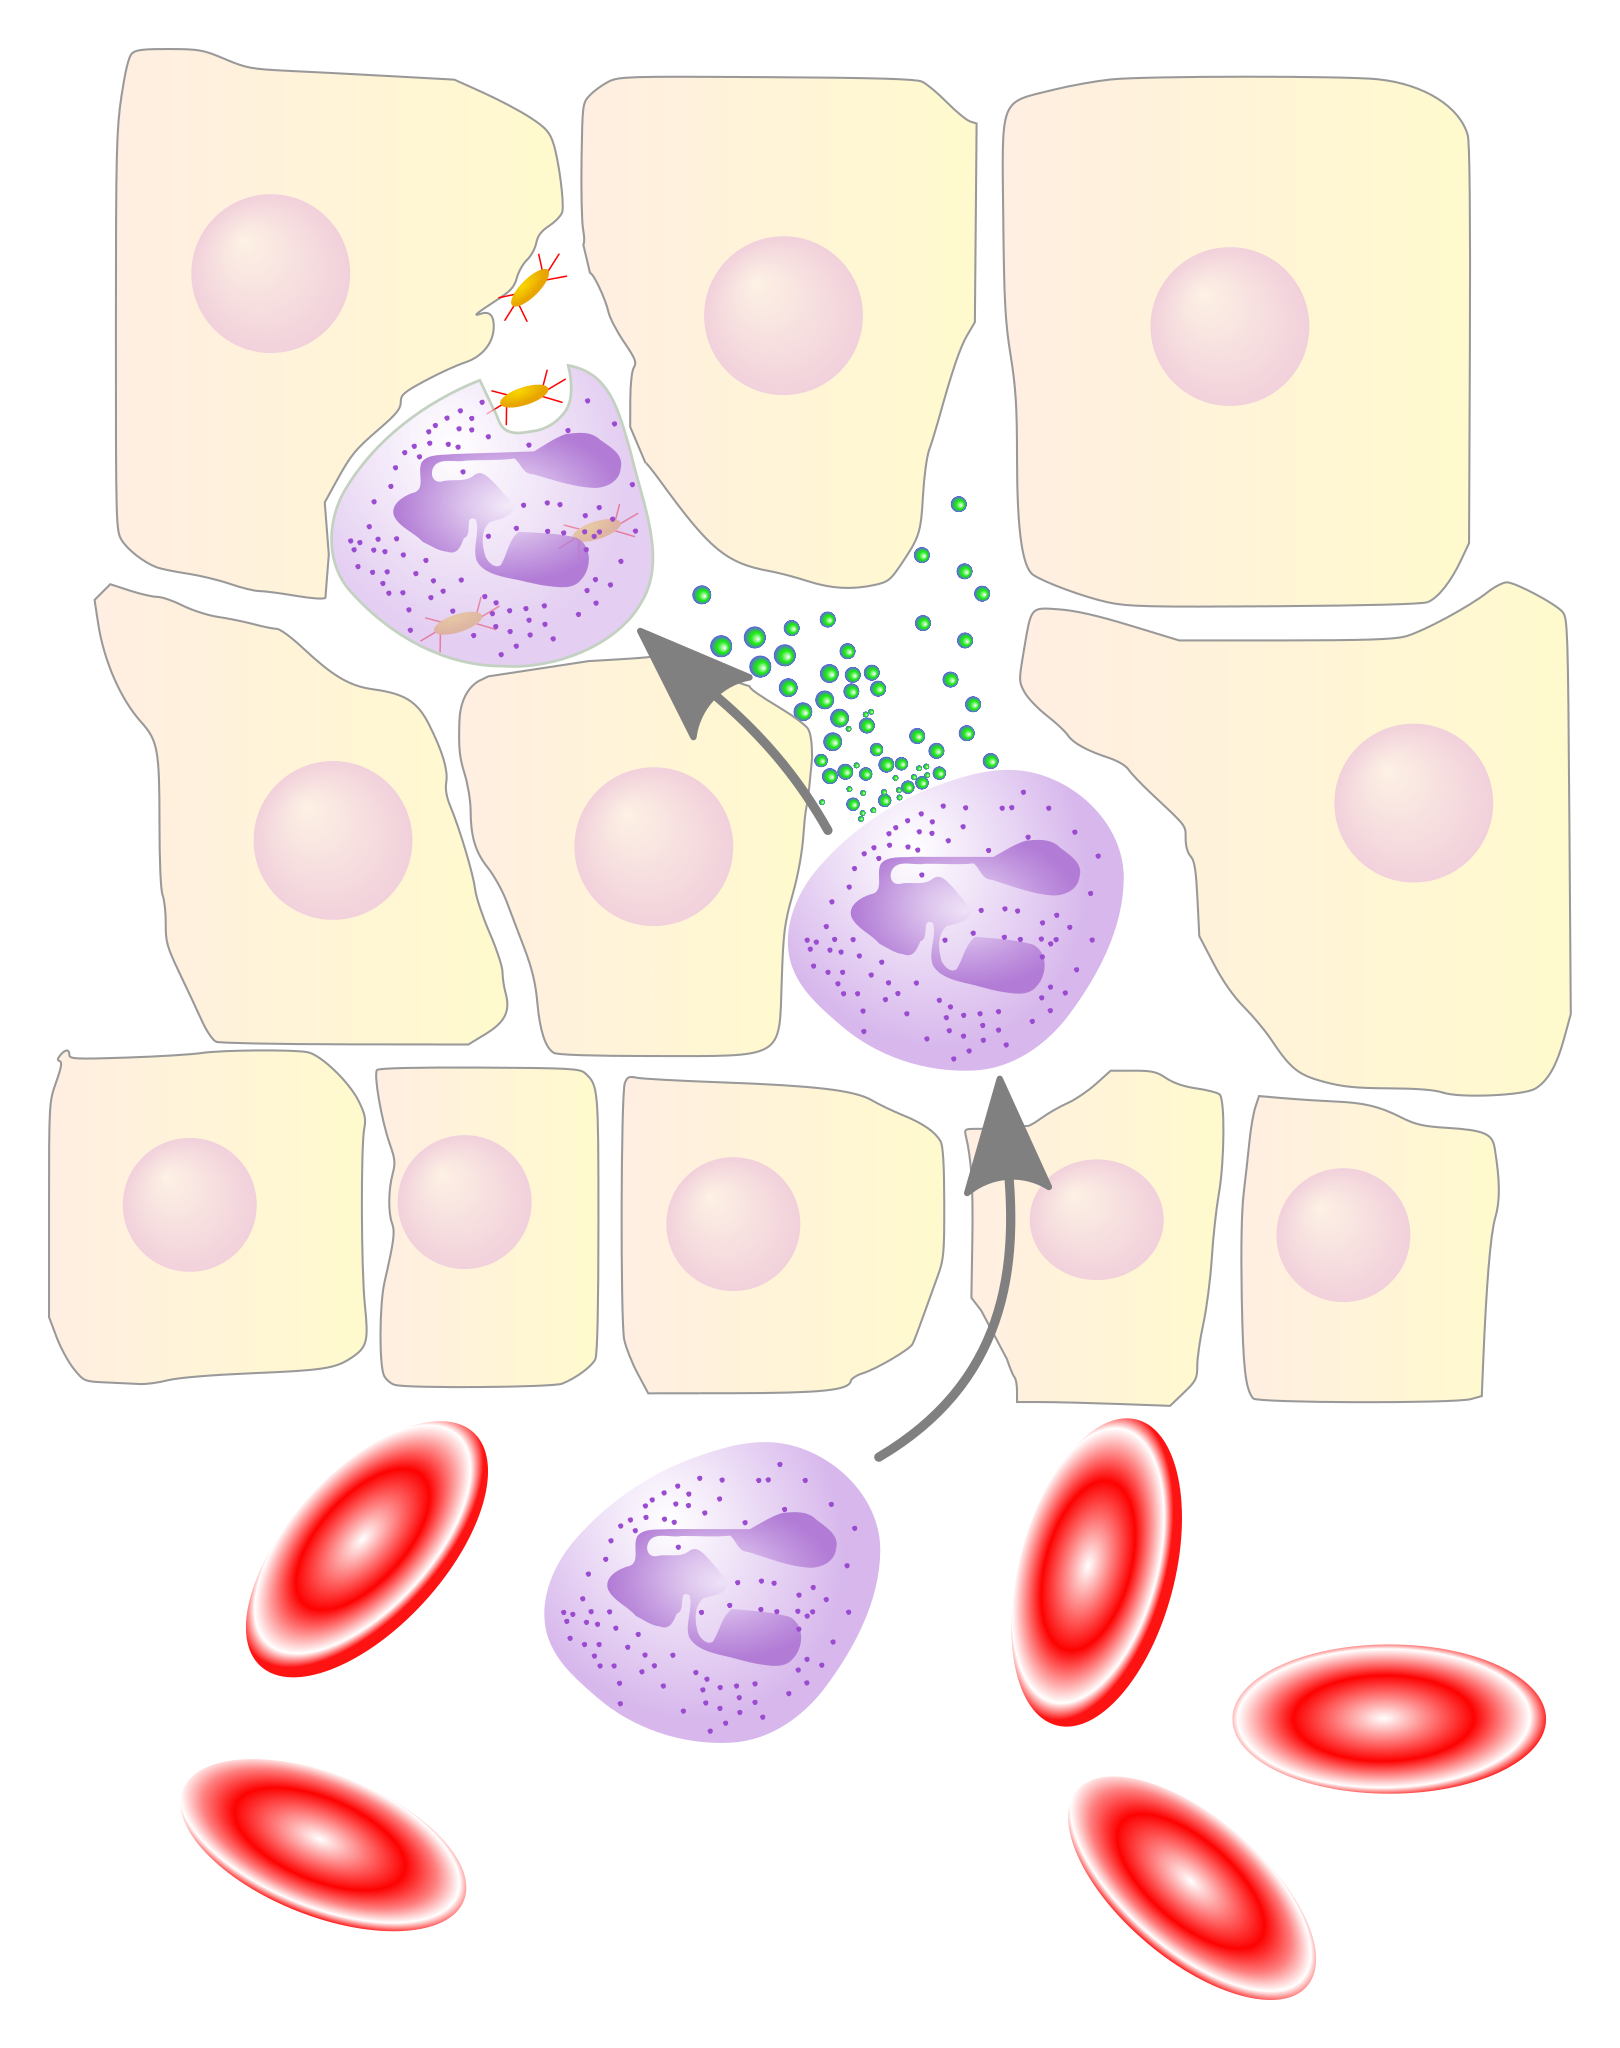 White blood cells migrate